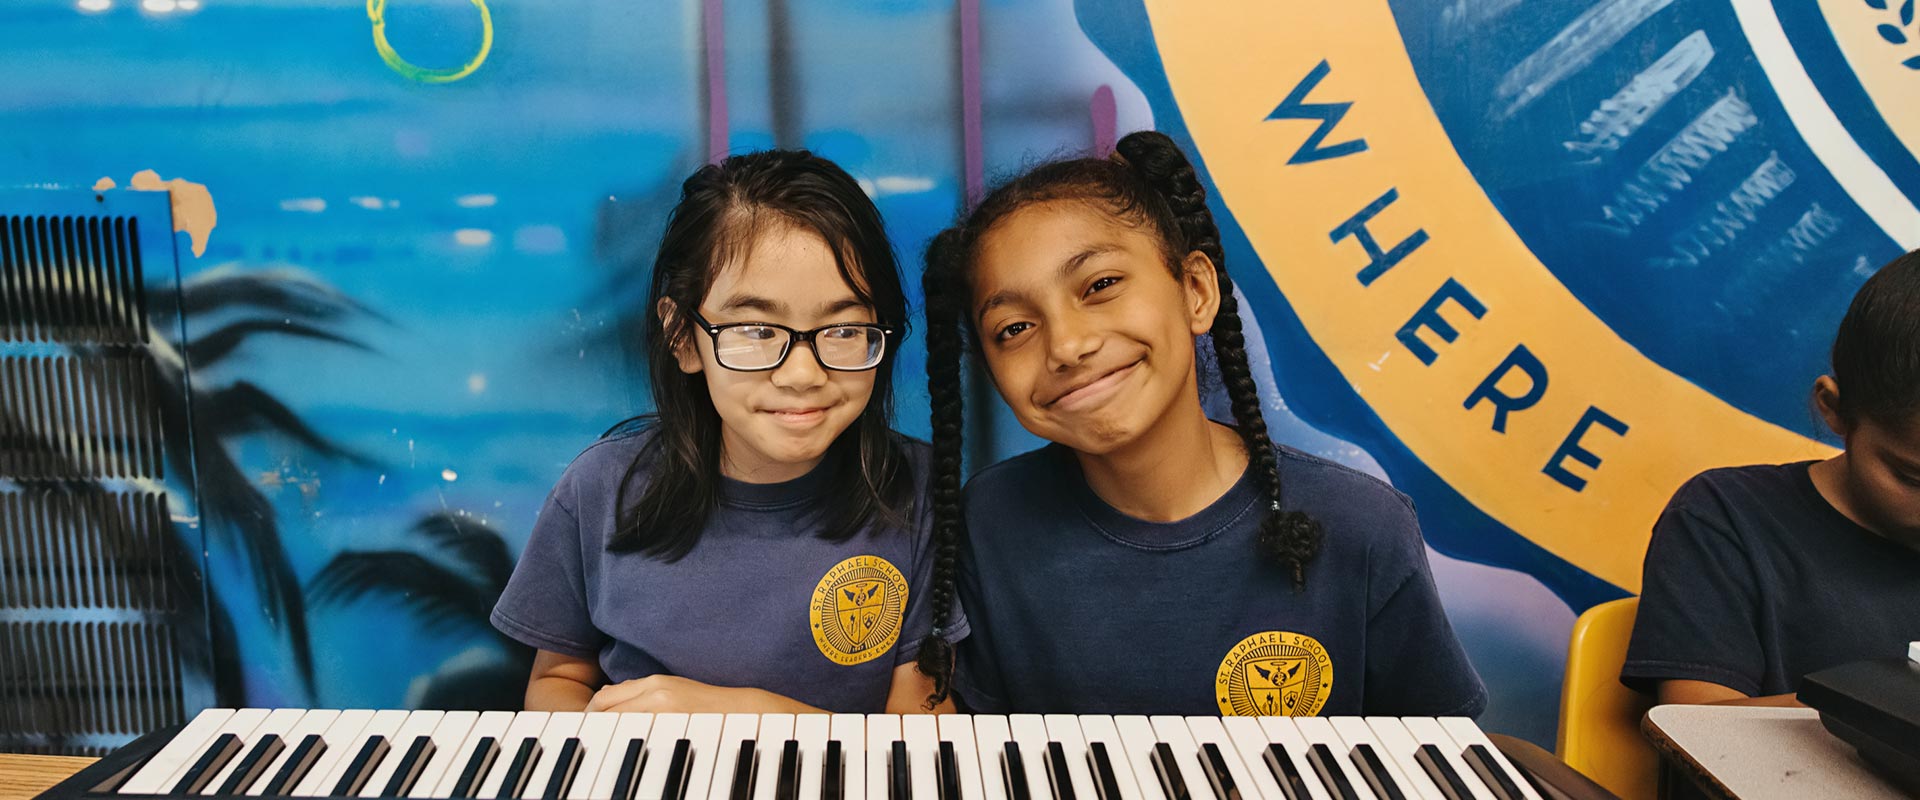 Two St. Raphael students sit together at keyboard